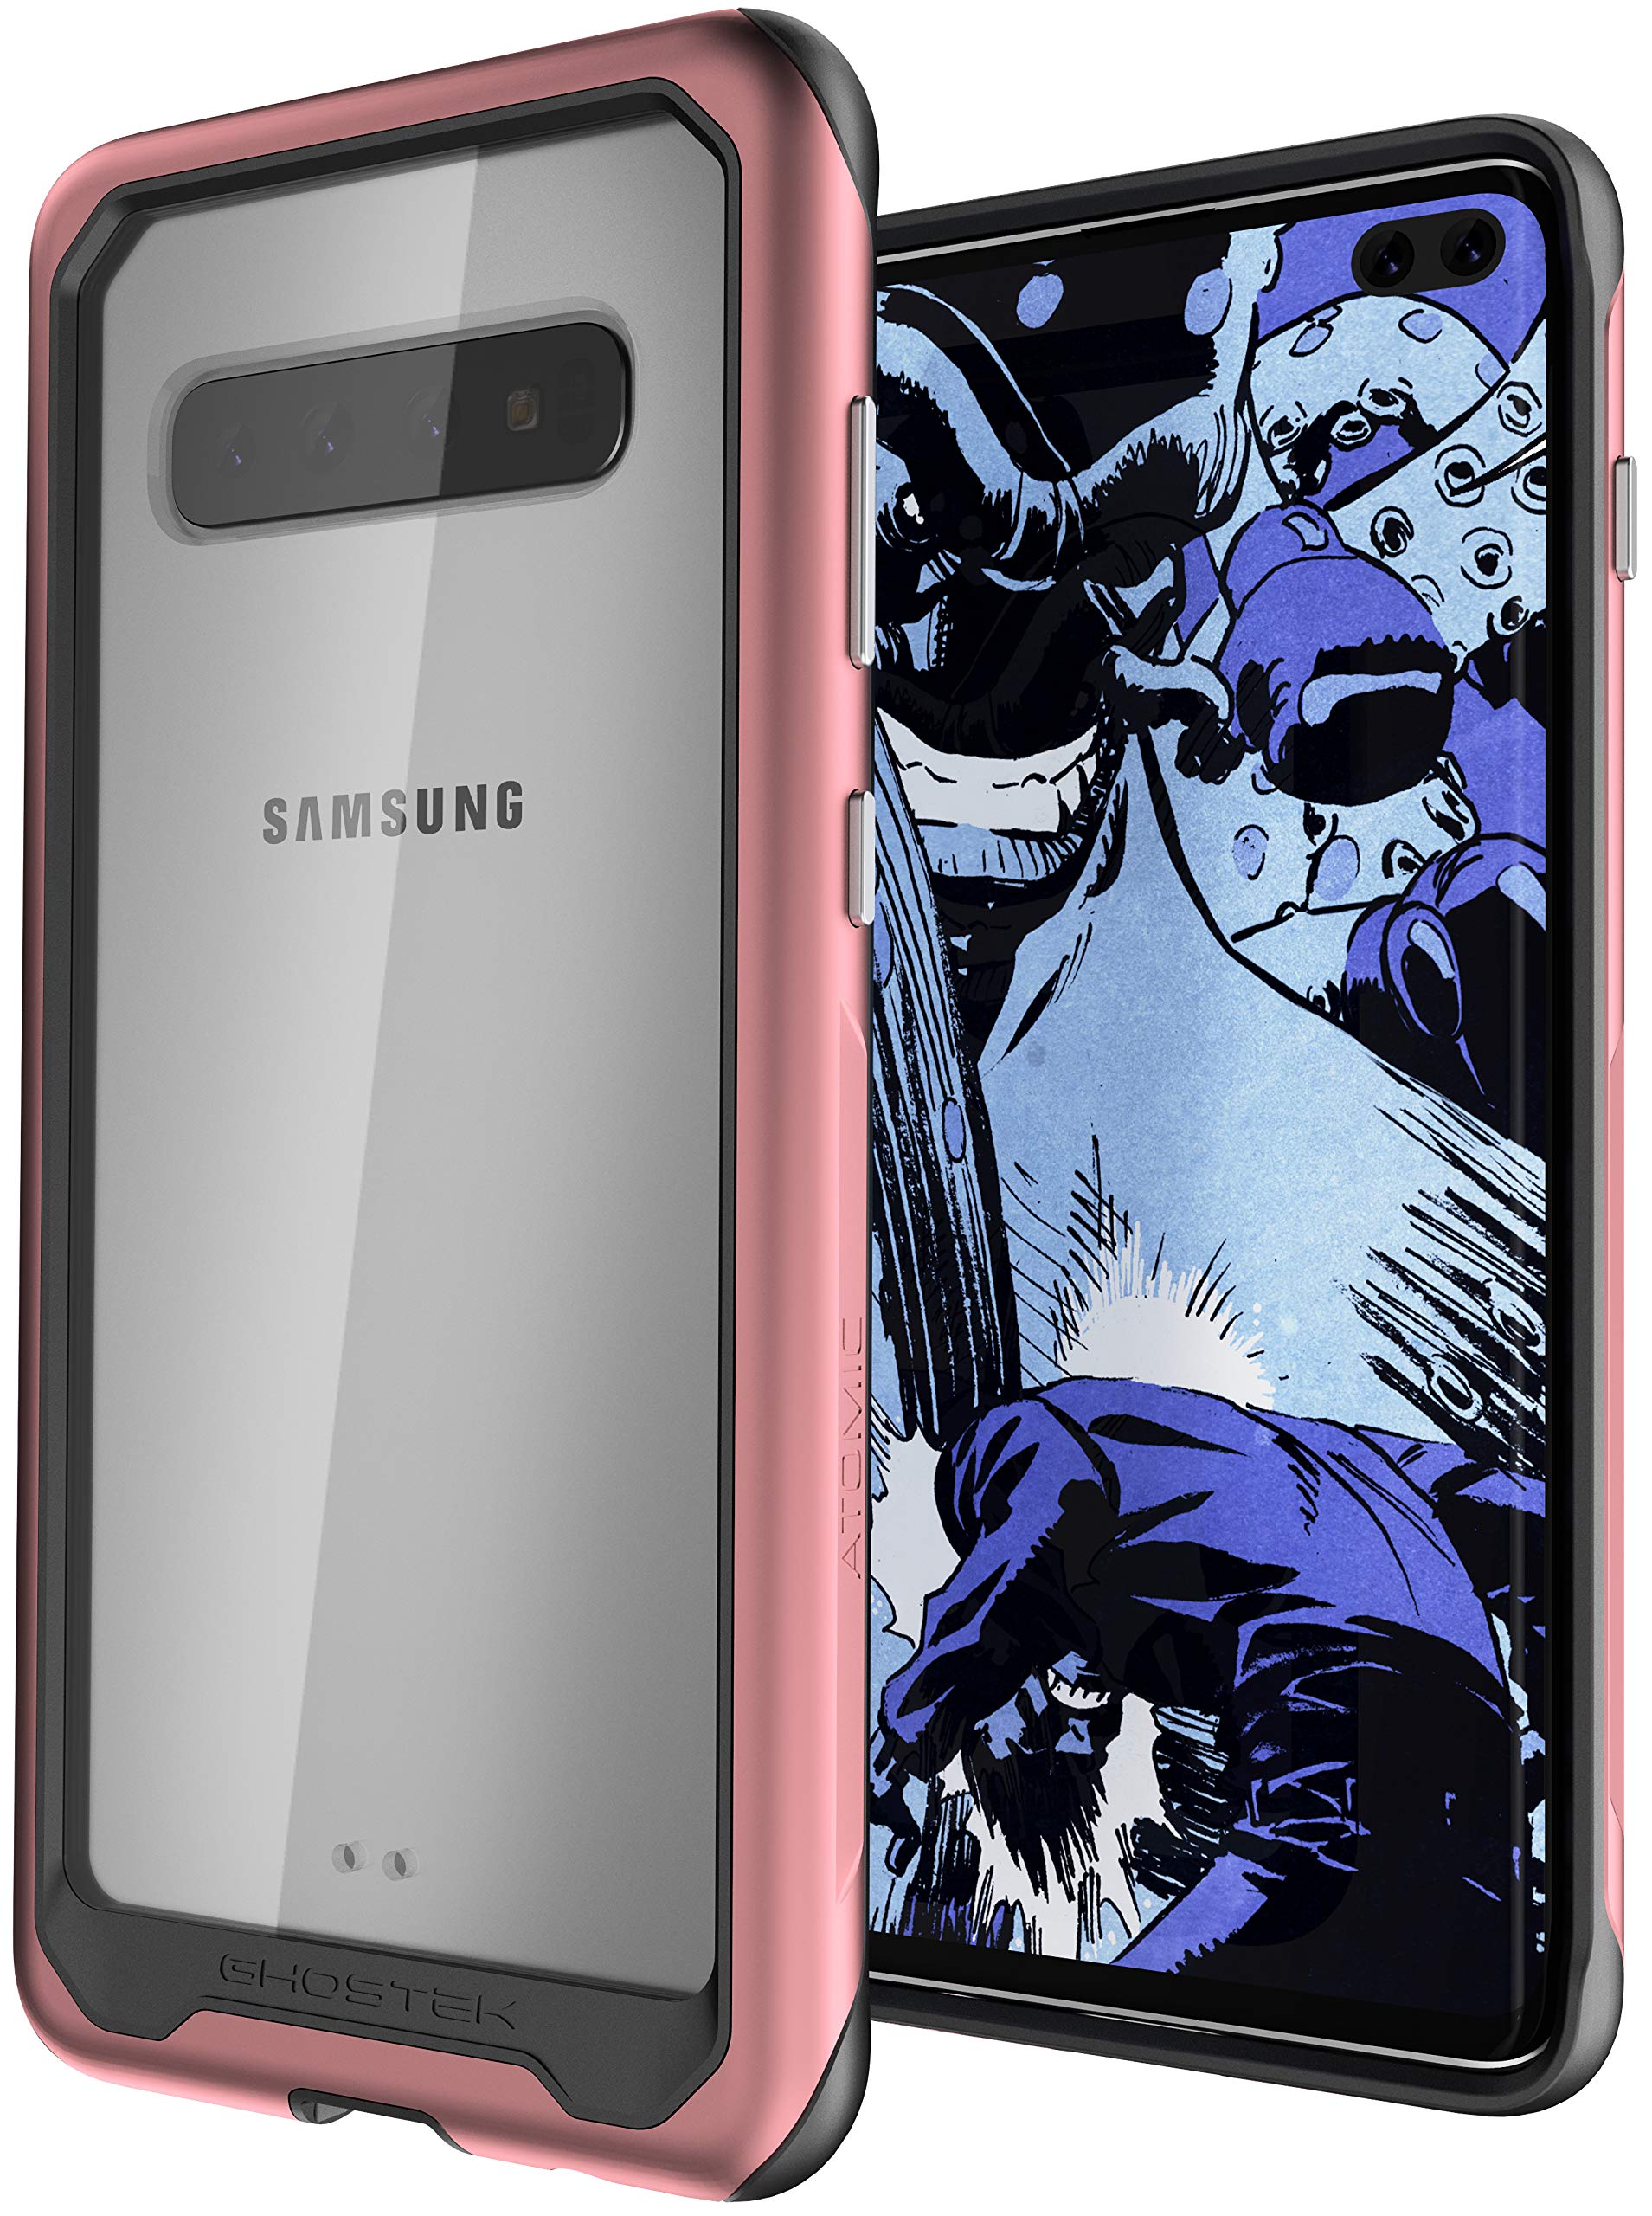 Ghostek Atomic Slim Galaxy S10 Plus Clear Case with Super Space Metal Bumper Design Tough Shockproof Heavy Duty Protection and Wireless Charging Compatible for 2019 Galaxy S10+ (6.4 Inch) - (Pink)